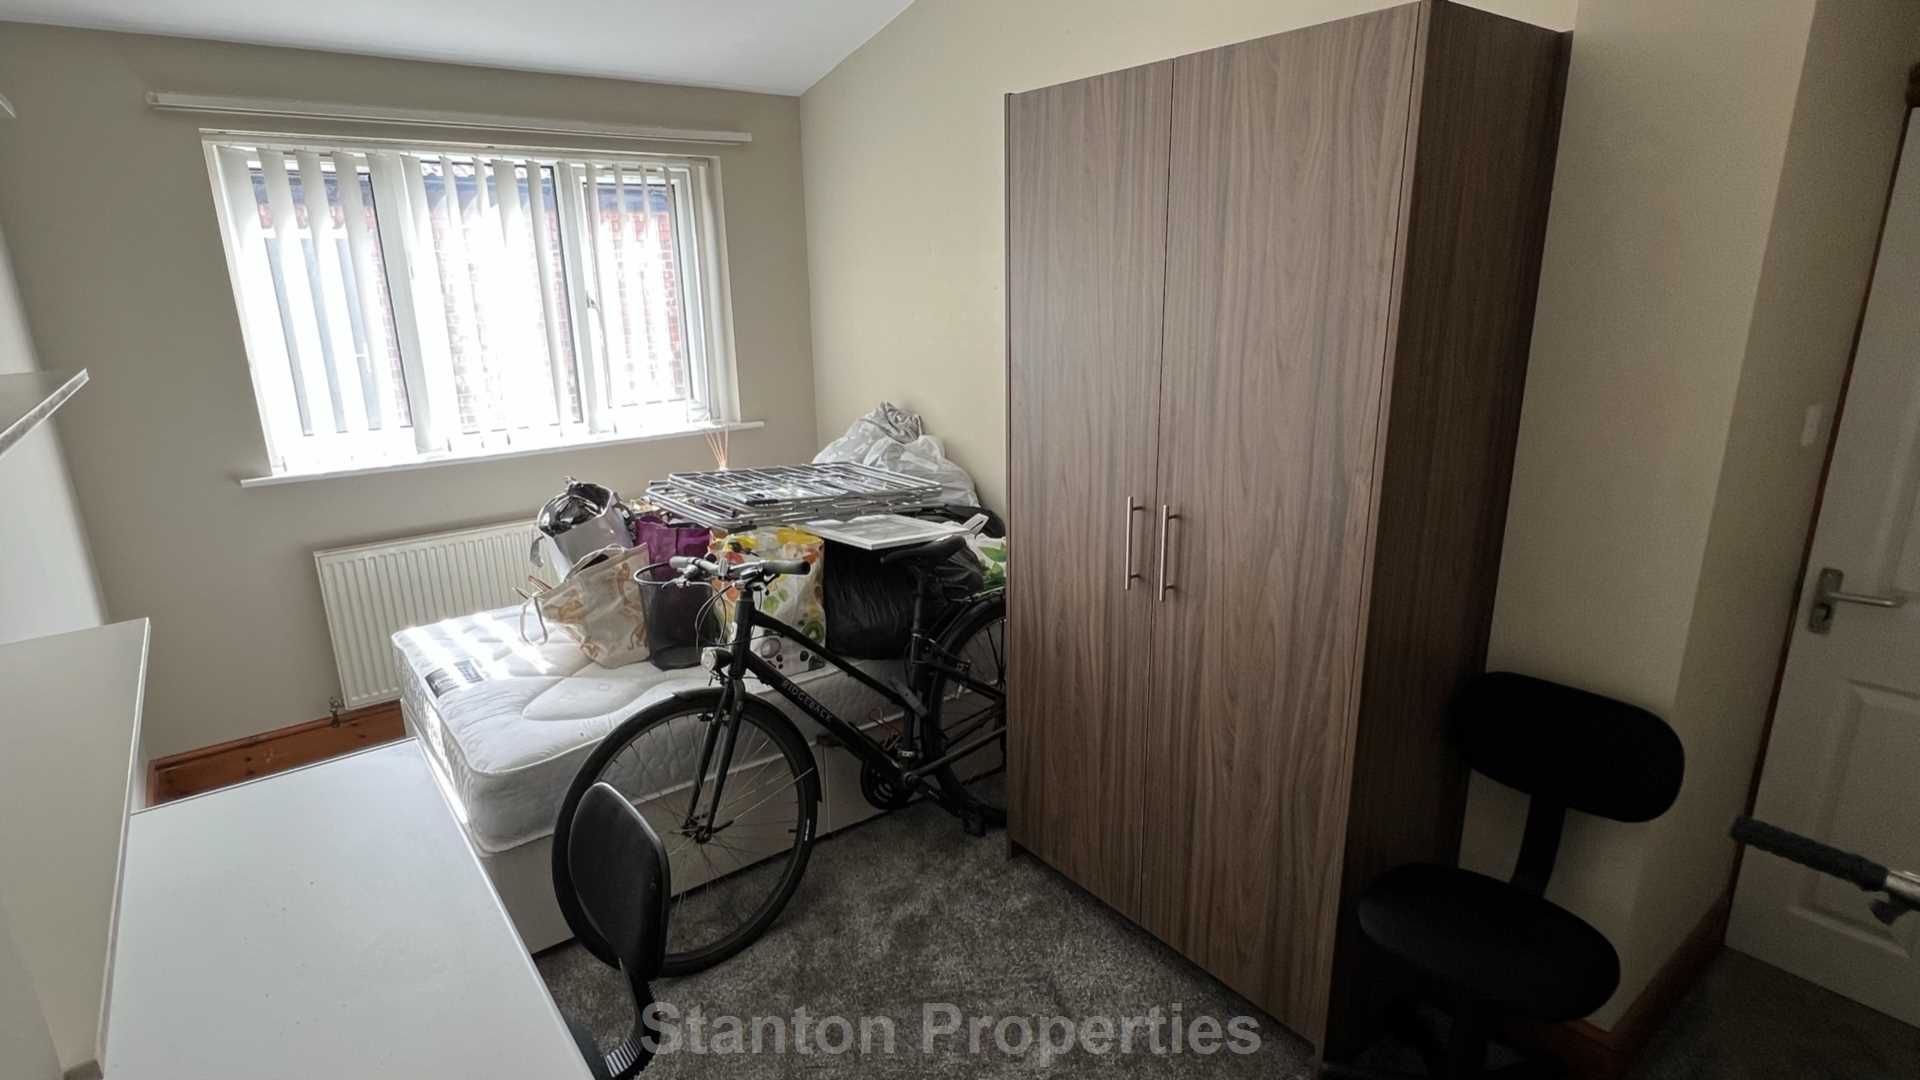 £120 pppw, Arnfield Road, Withington, Image 17